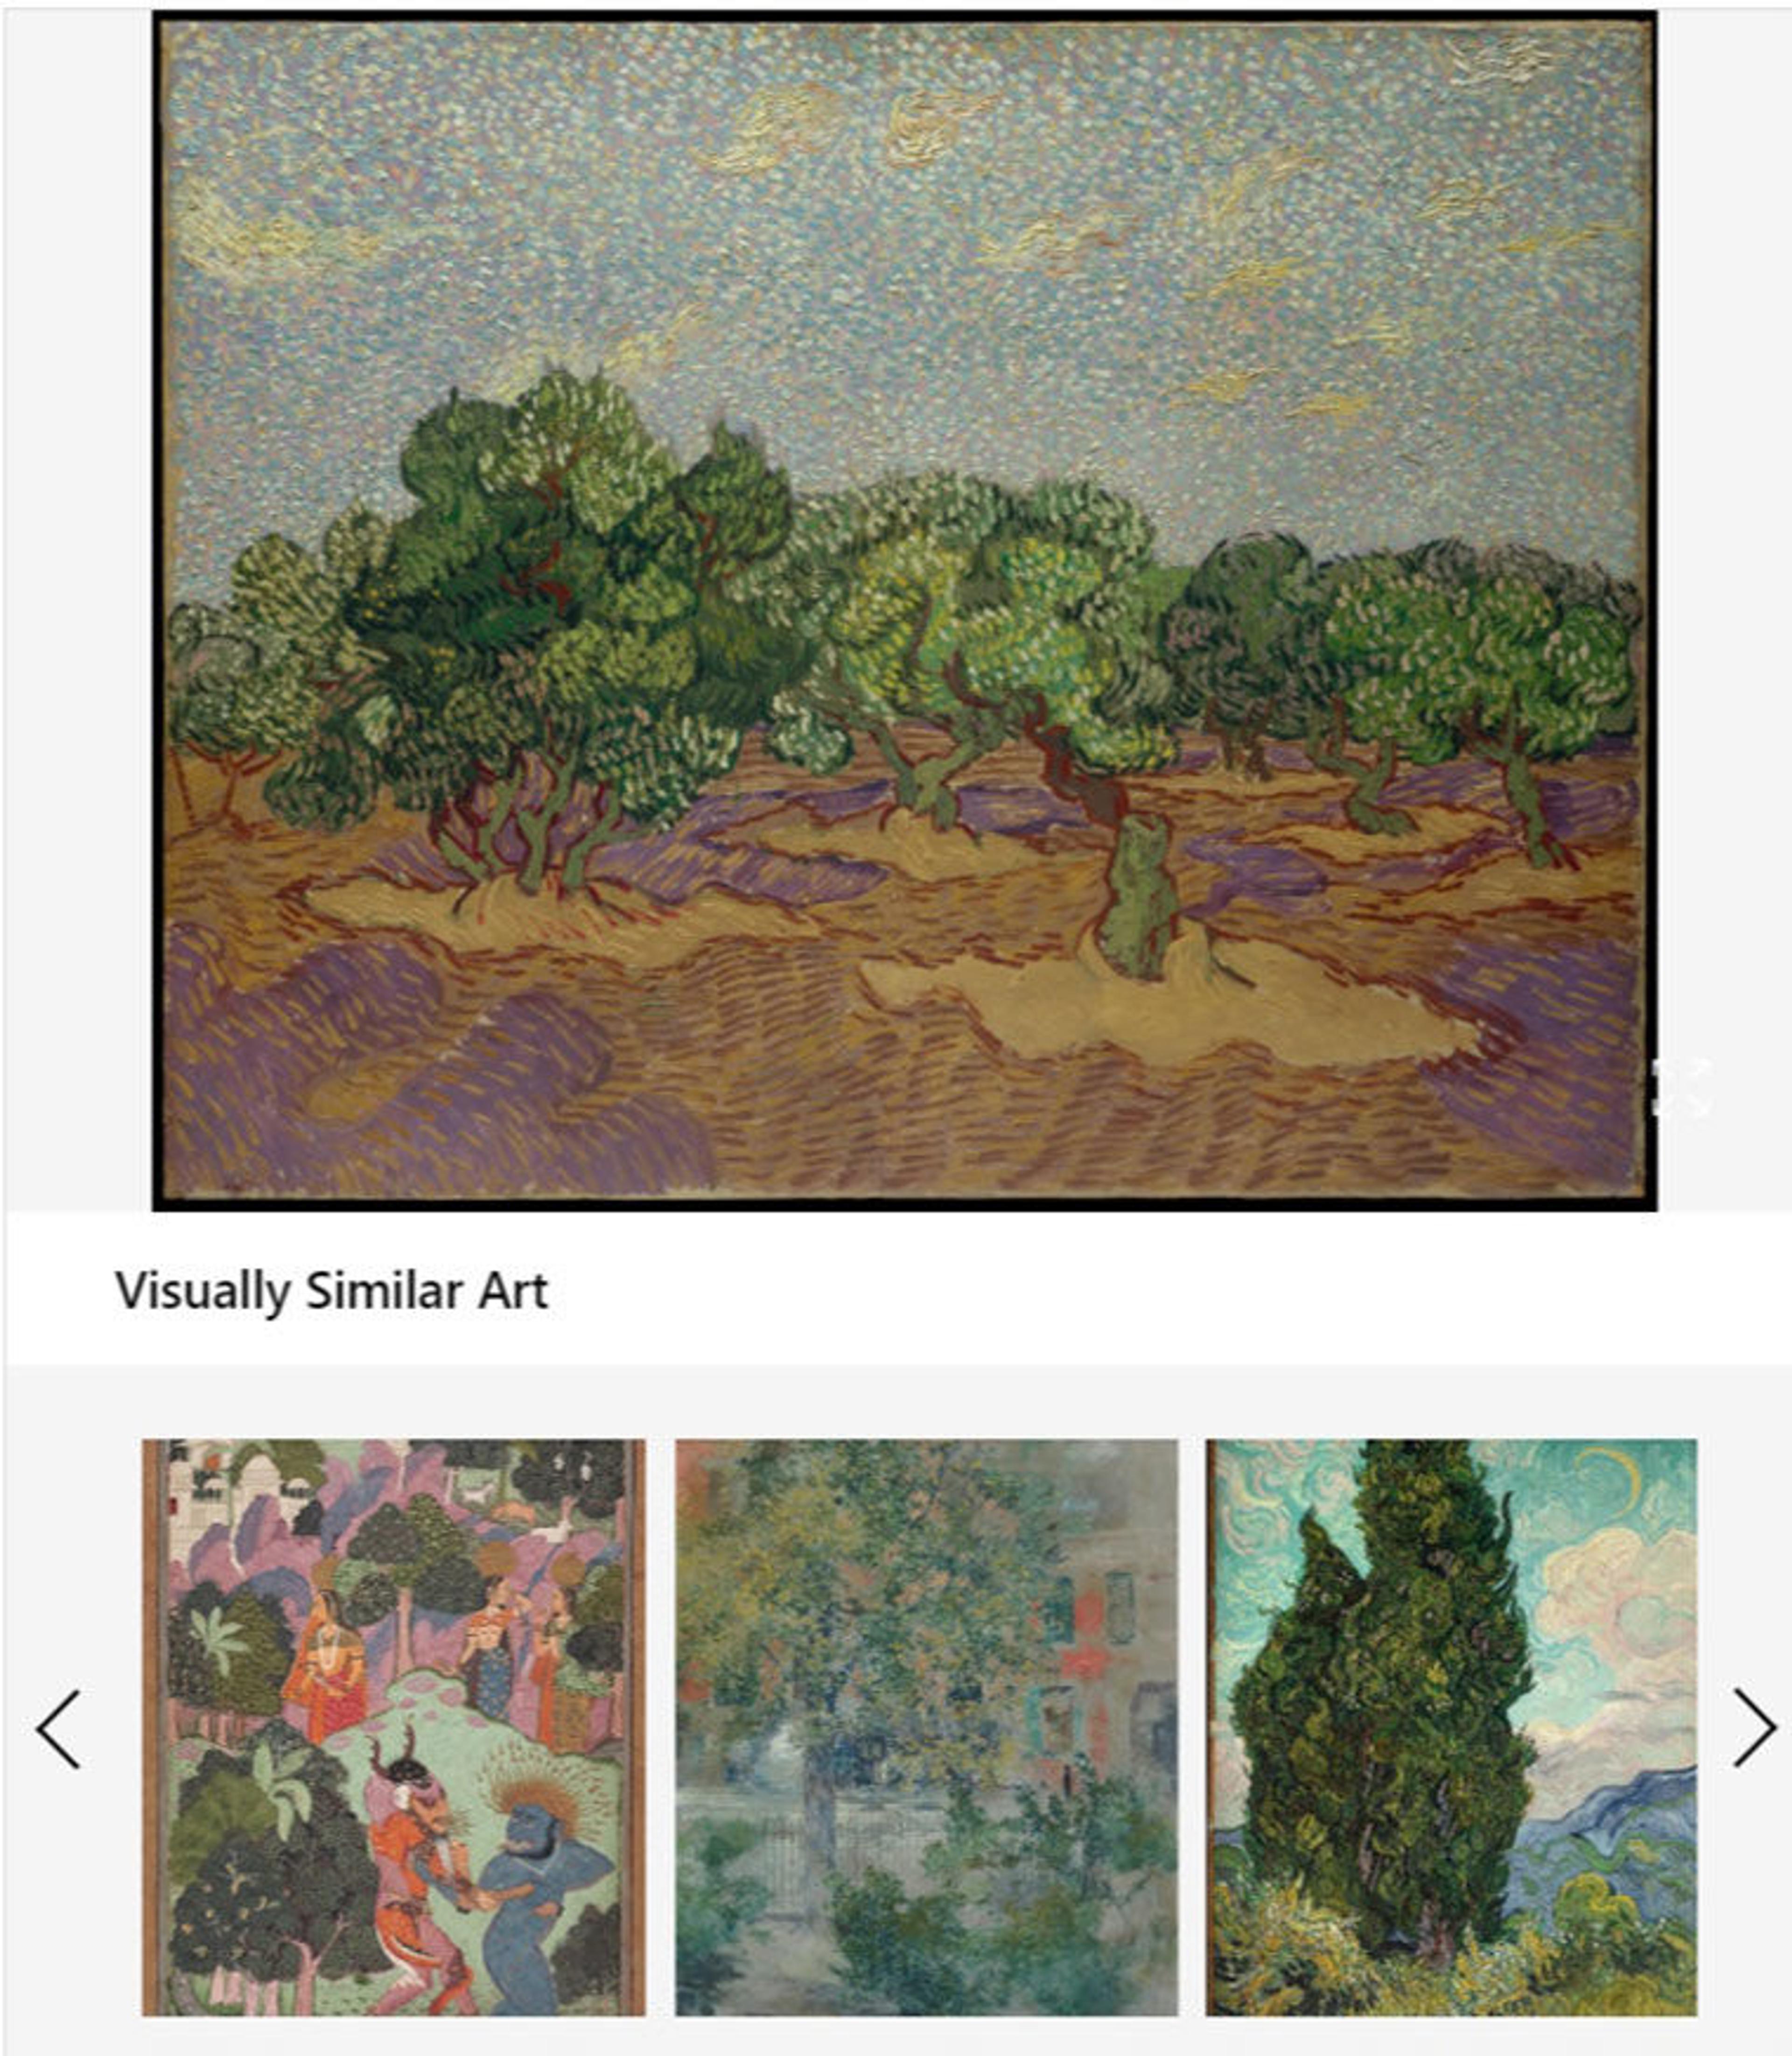 Large painting by Van Gogh with smaller paintings below